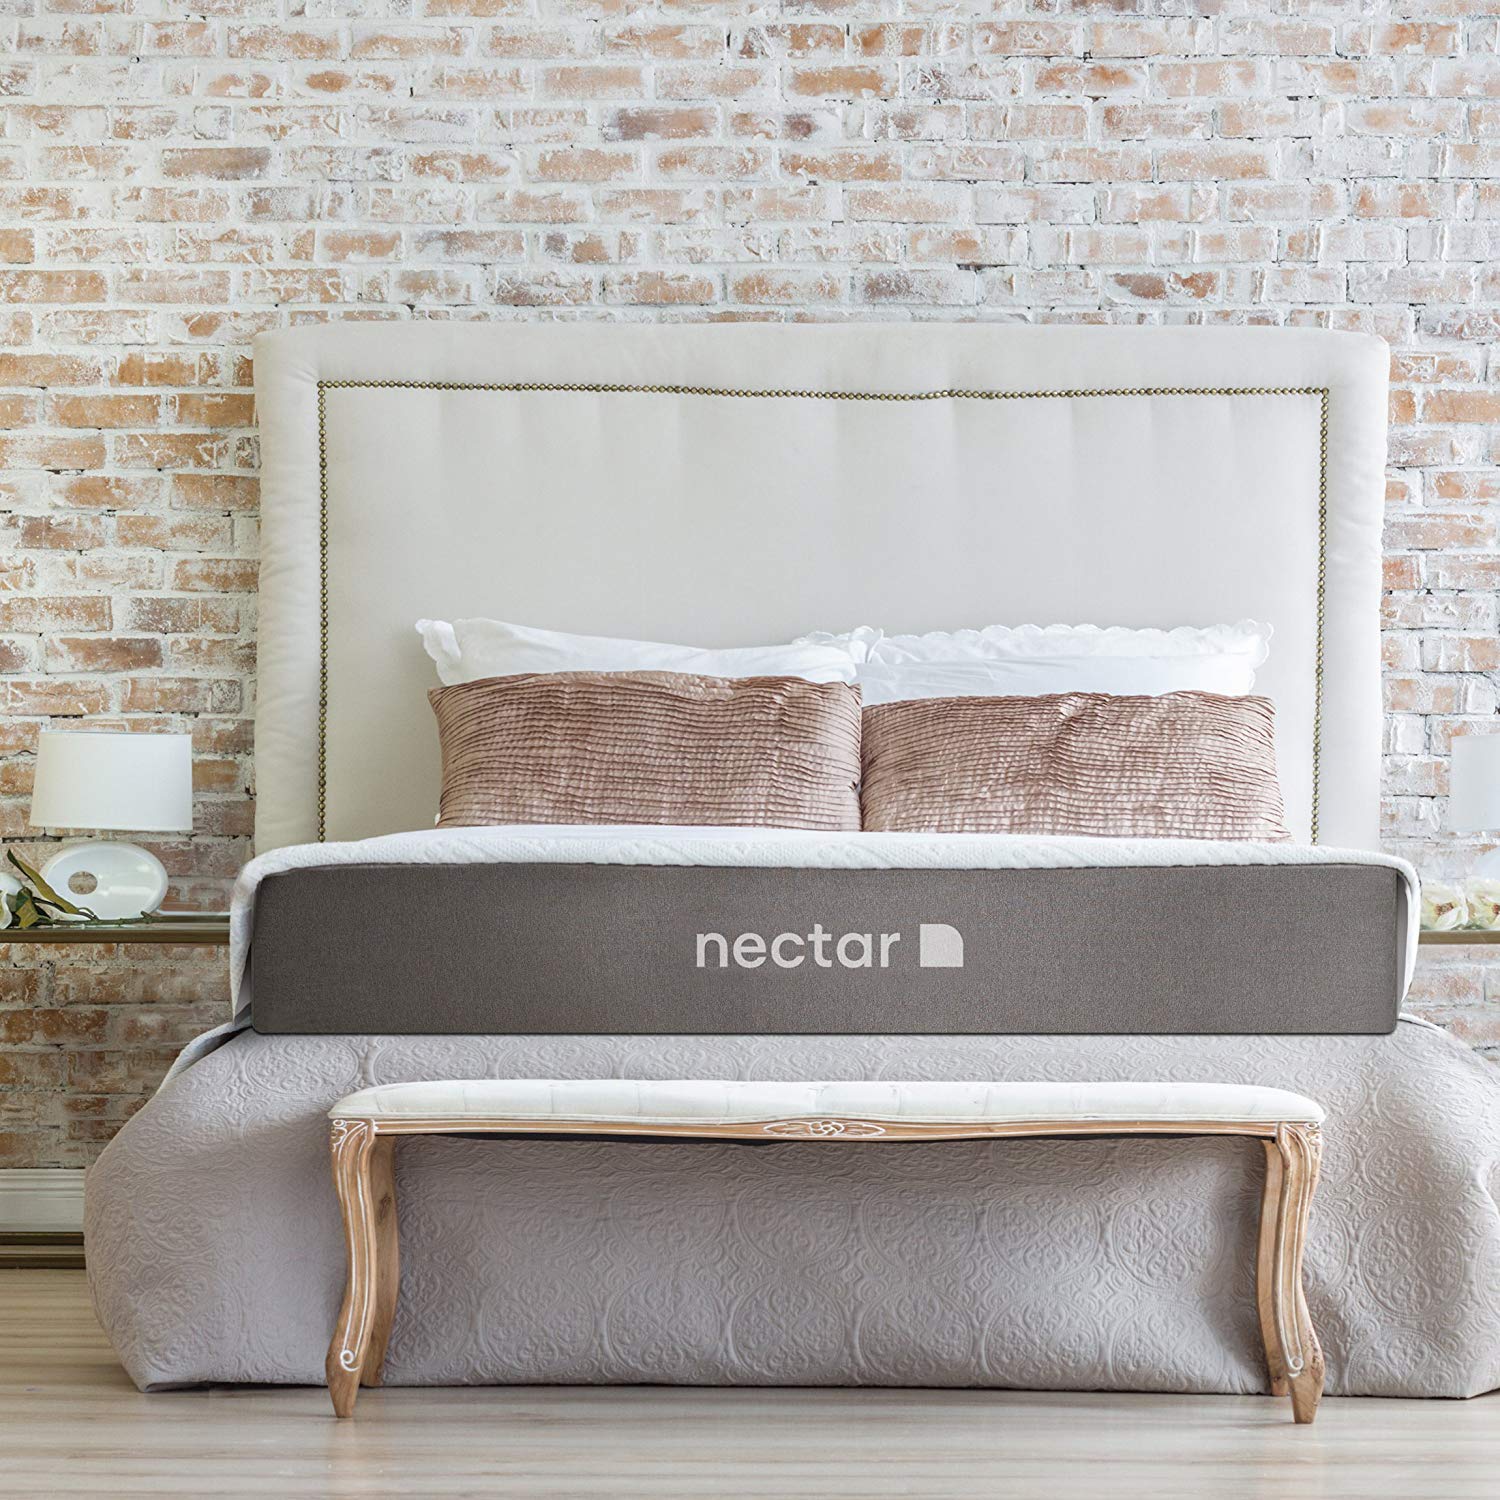 nectar bed